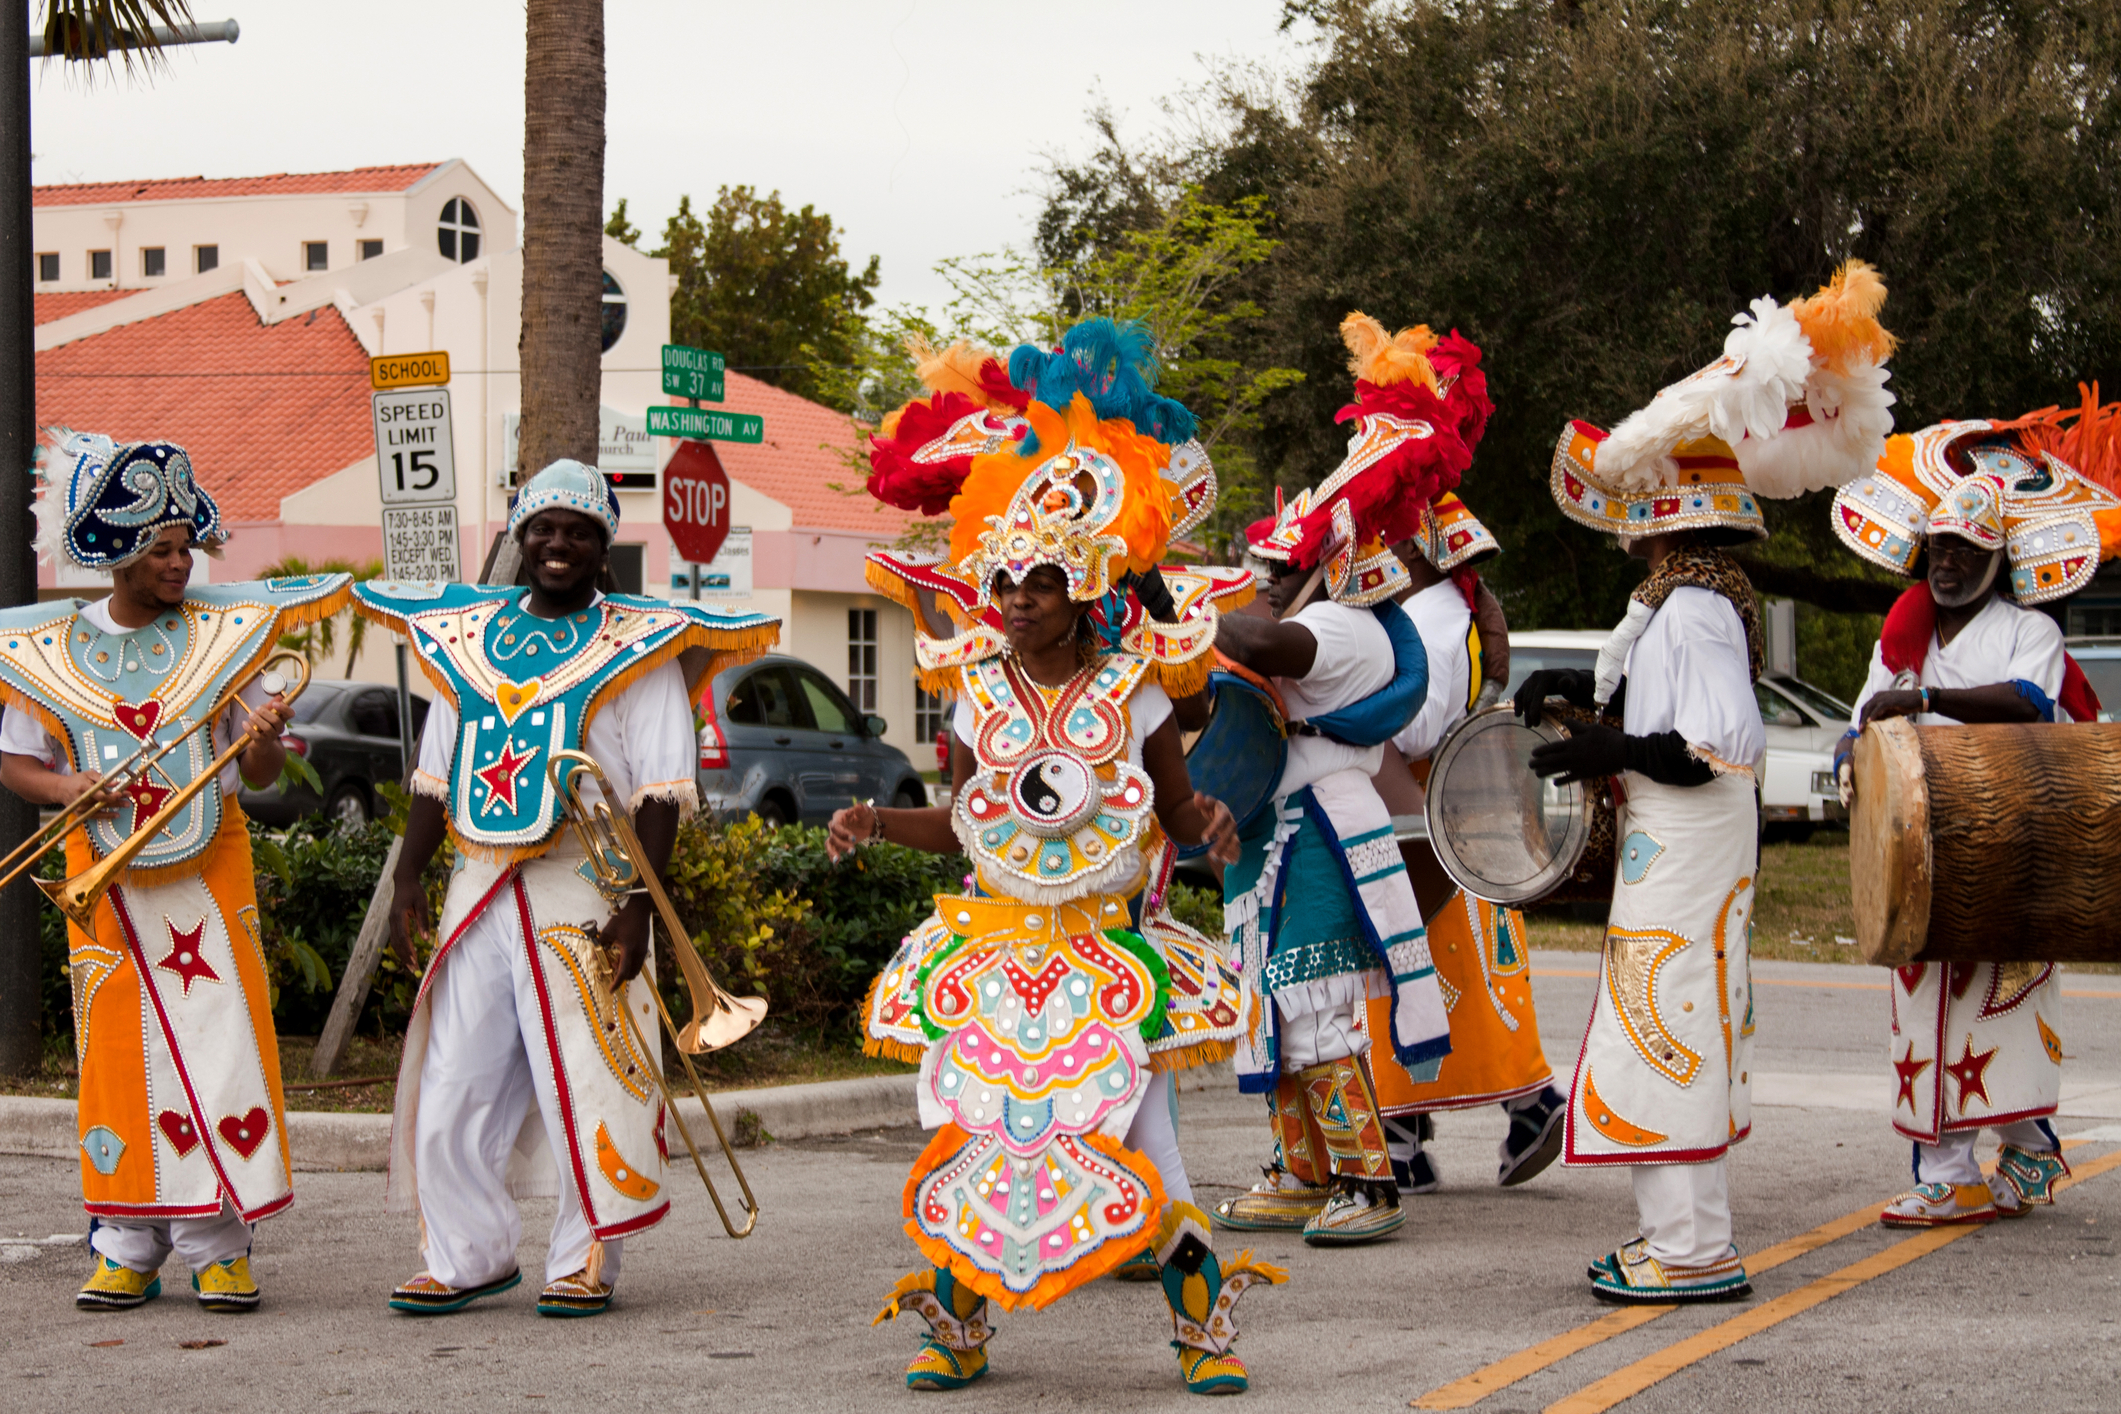 Caribbean Christmas Junkanoo Parade is one of the Unconventional Christmas Celebrations: Quirky Christmas Traditions